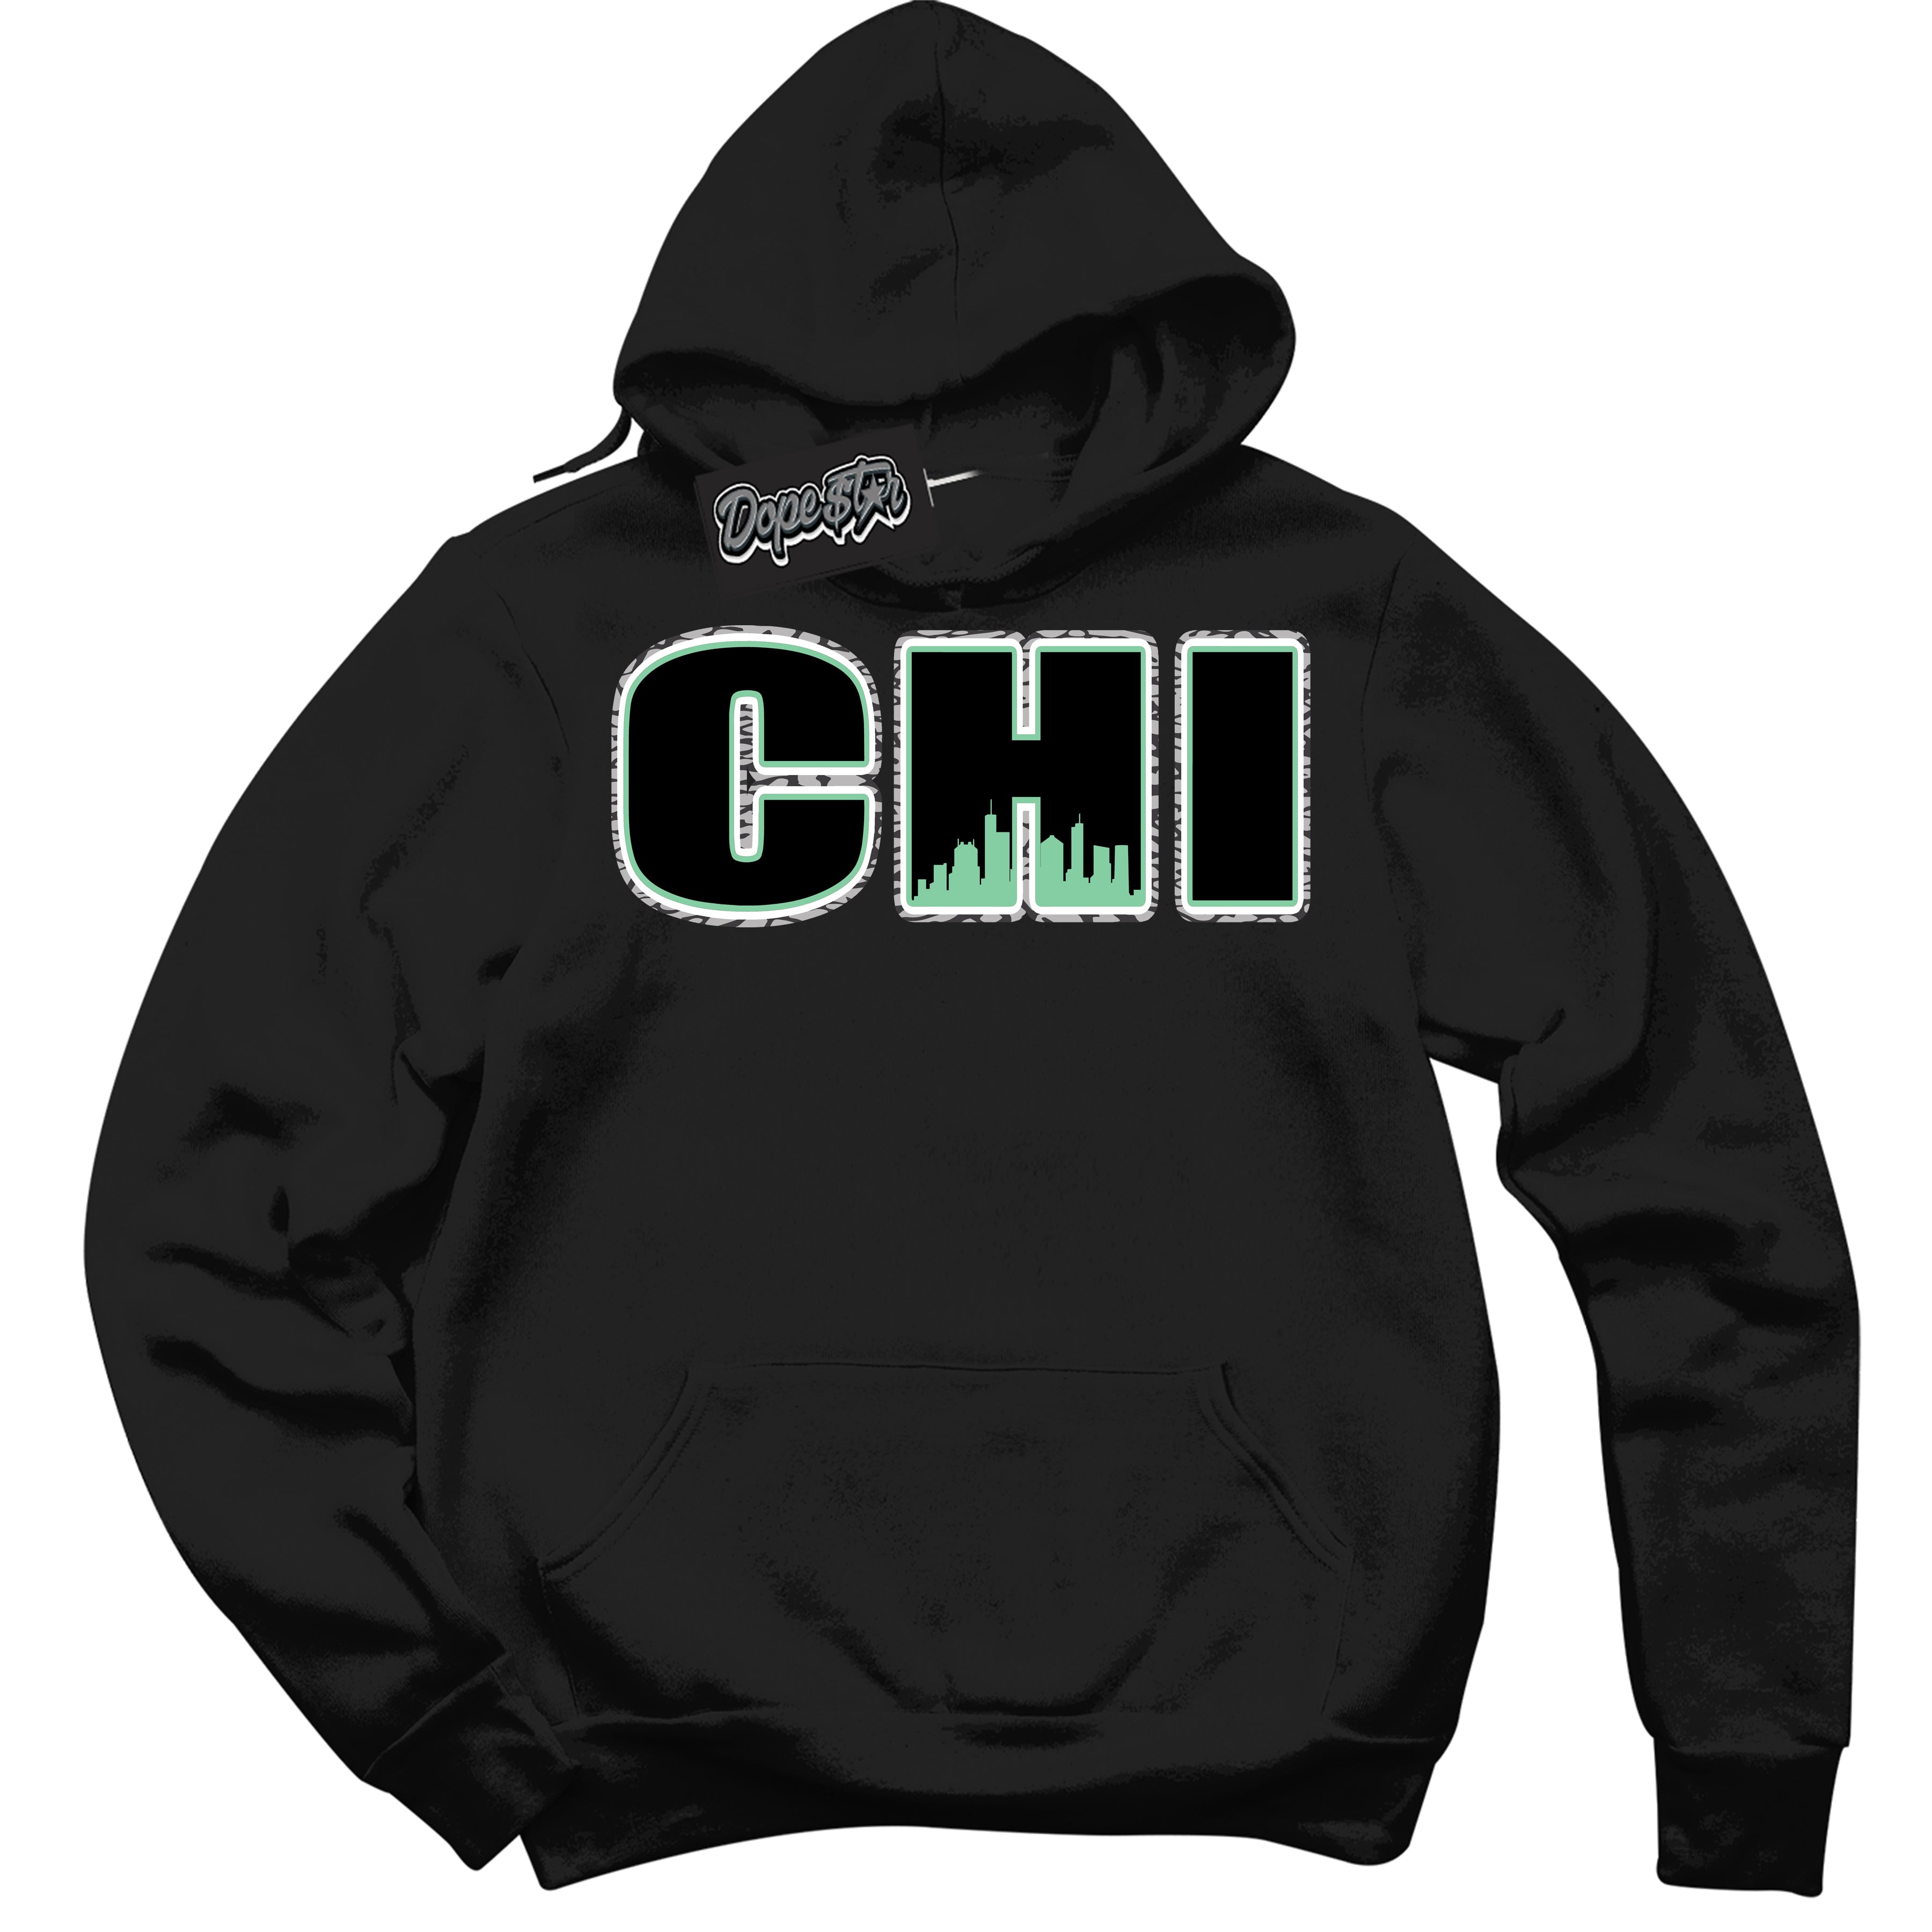 Cool Black Graphic DopeStar Hoodie with “ Chicago “ print, that perfectly matches Green Glow 3S sneakers